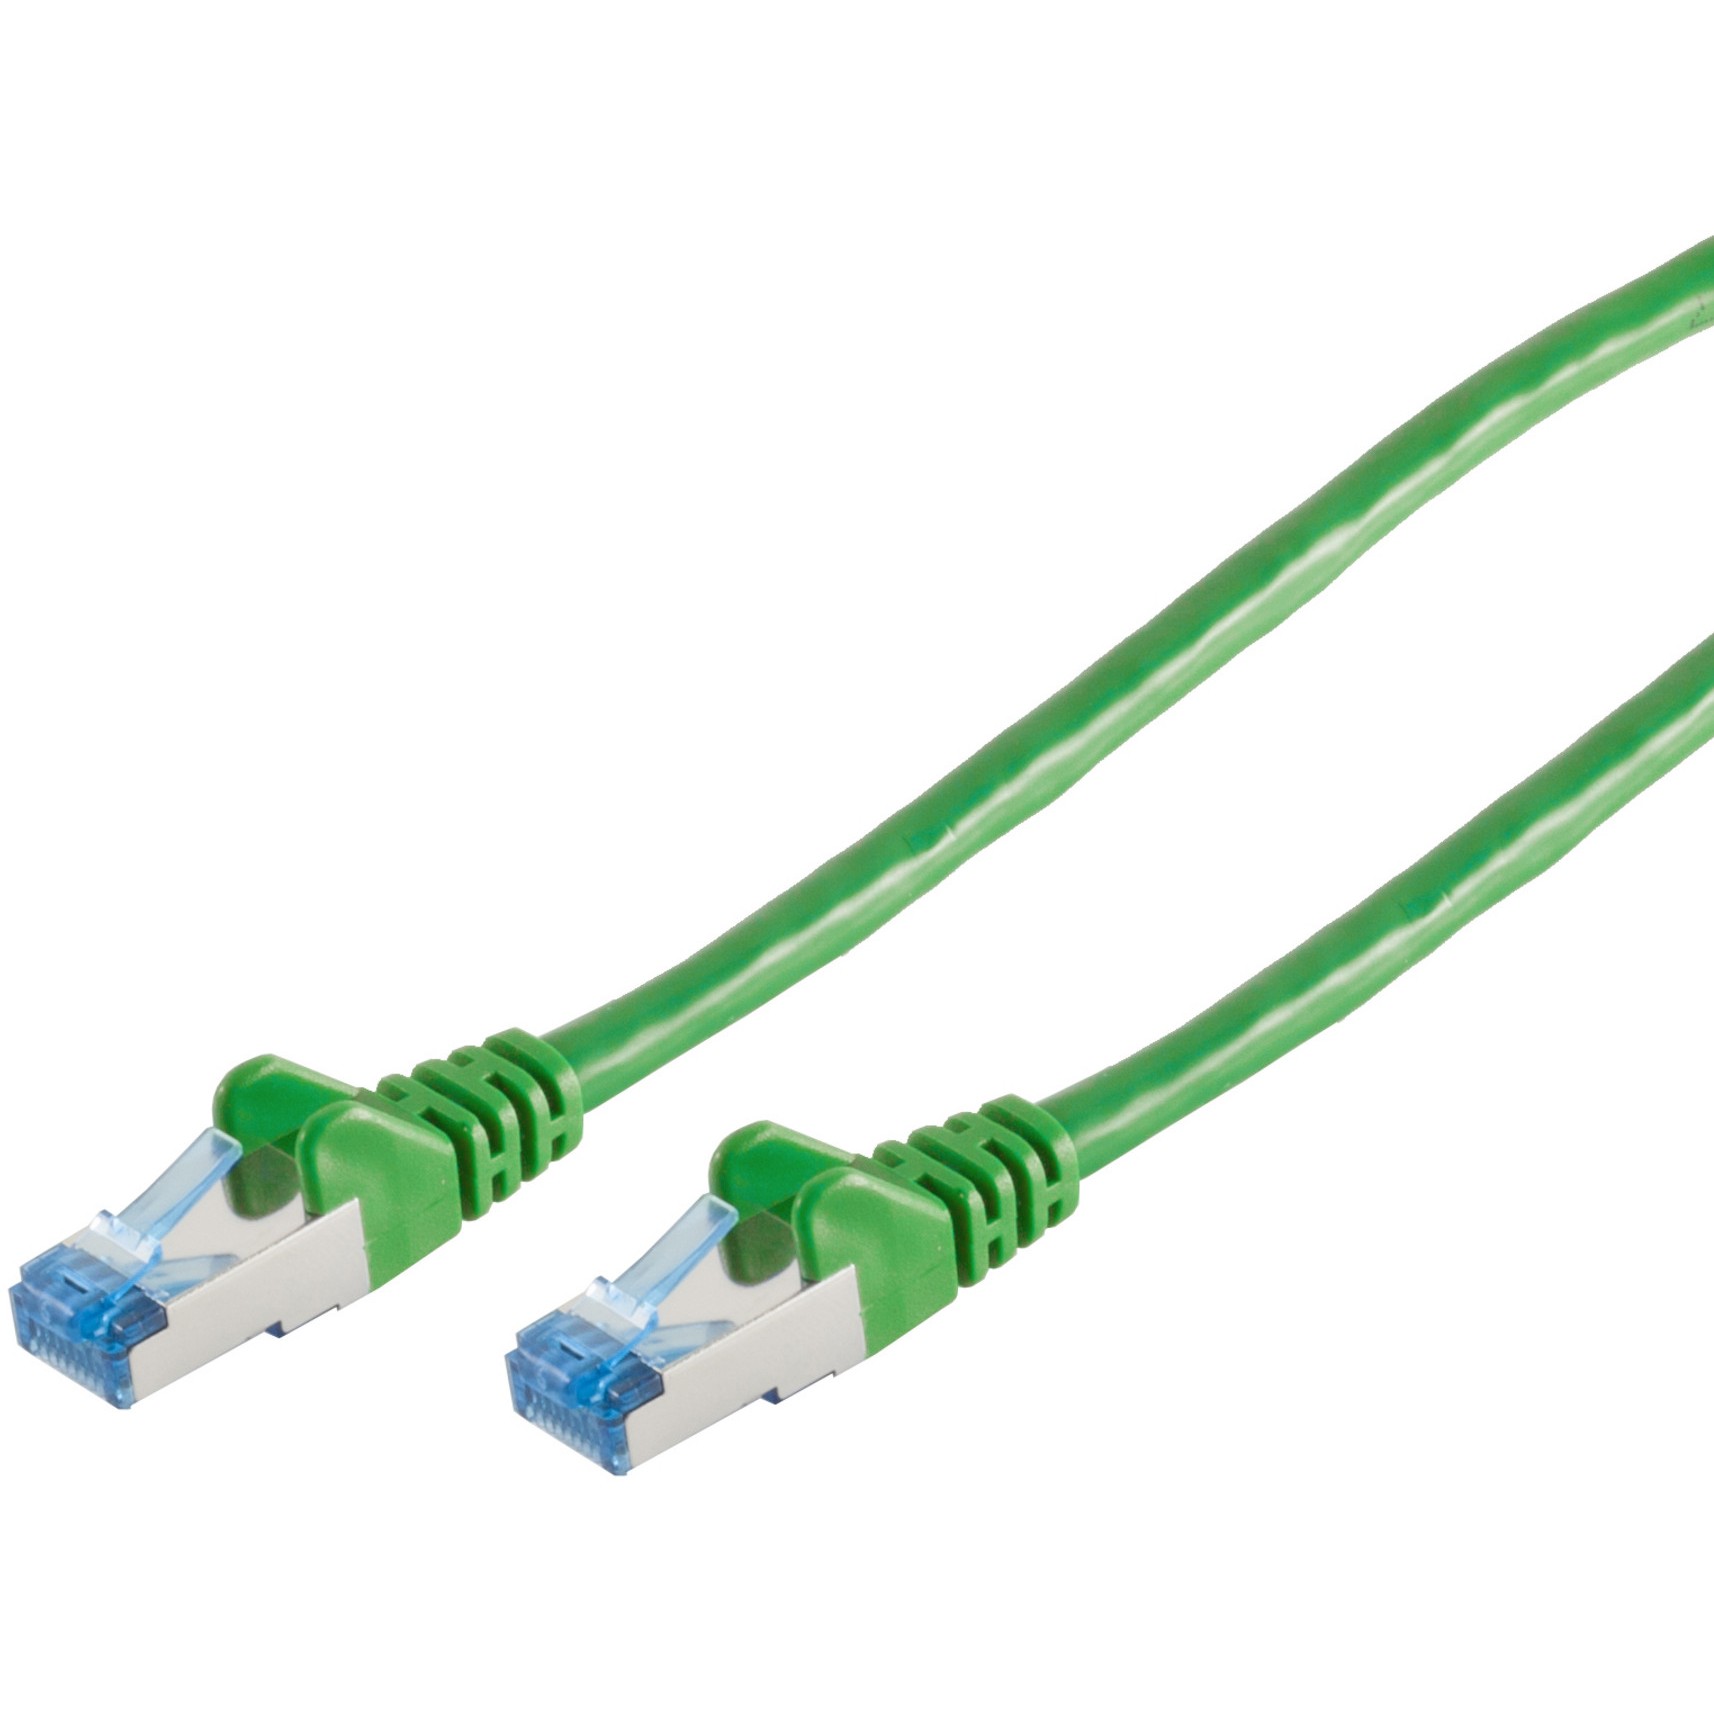 S-Conn 75711-G networking cable